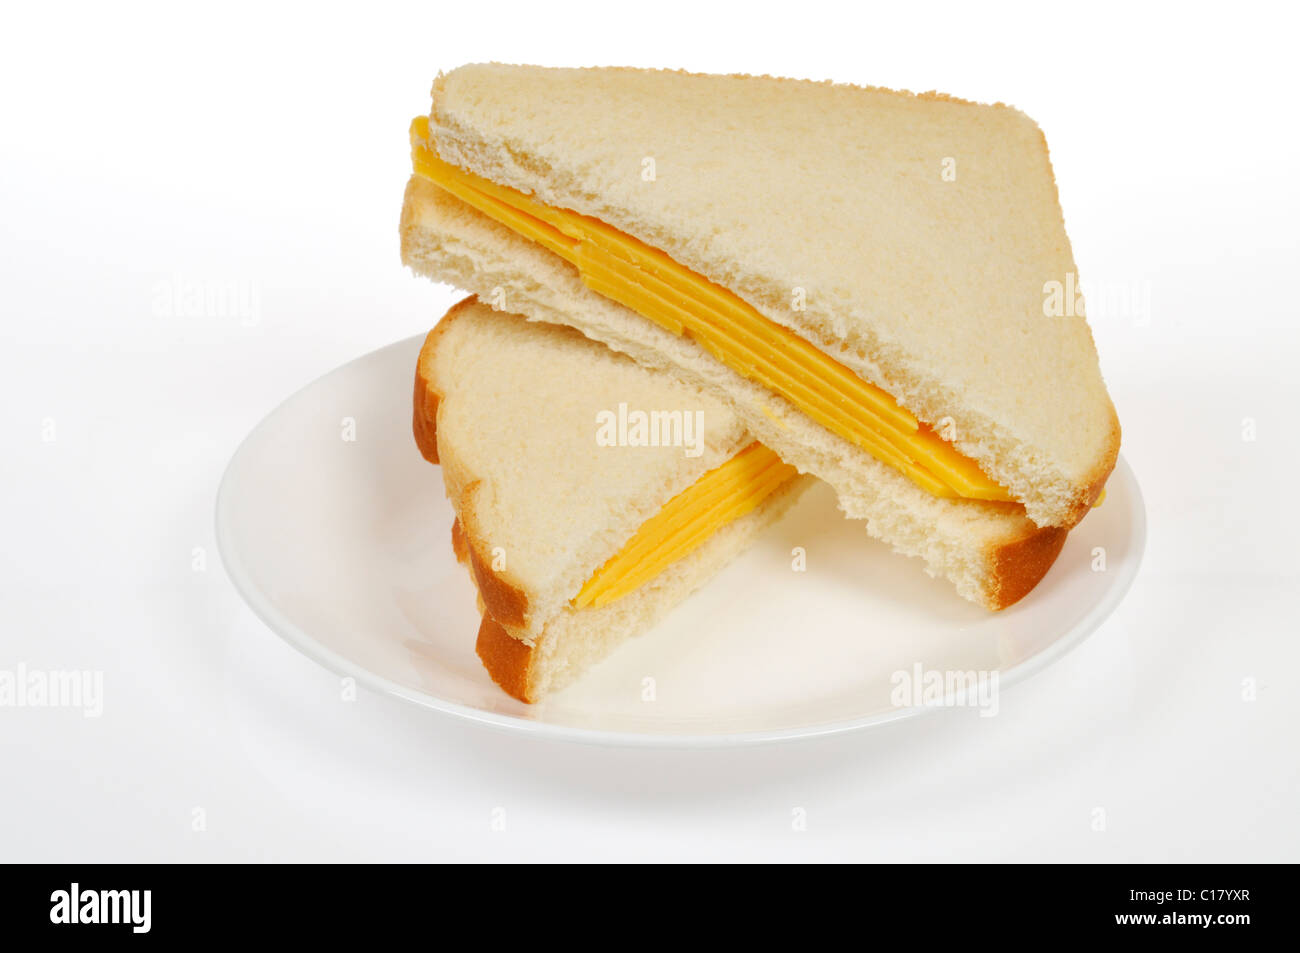 Cheese sandwich with 2 slices of cheese on white bread cut in half on white plate on white background, cutout. Stock Photo